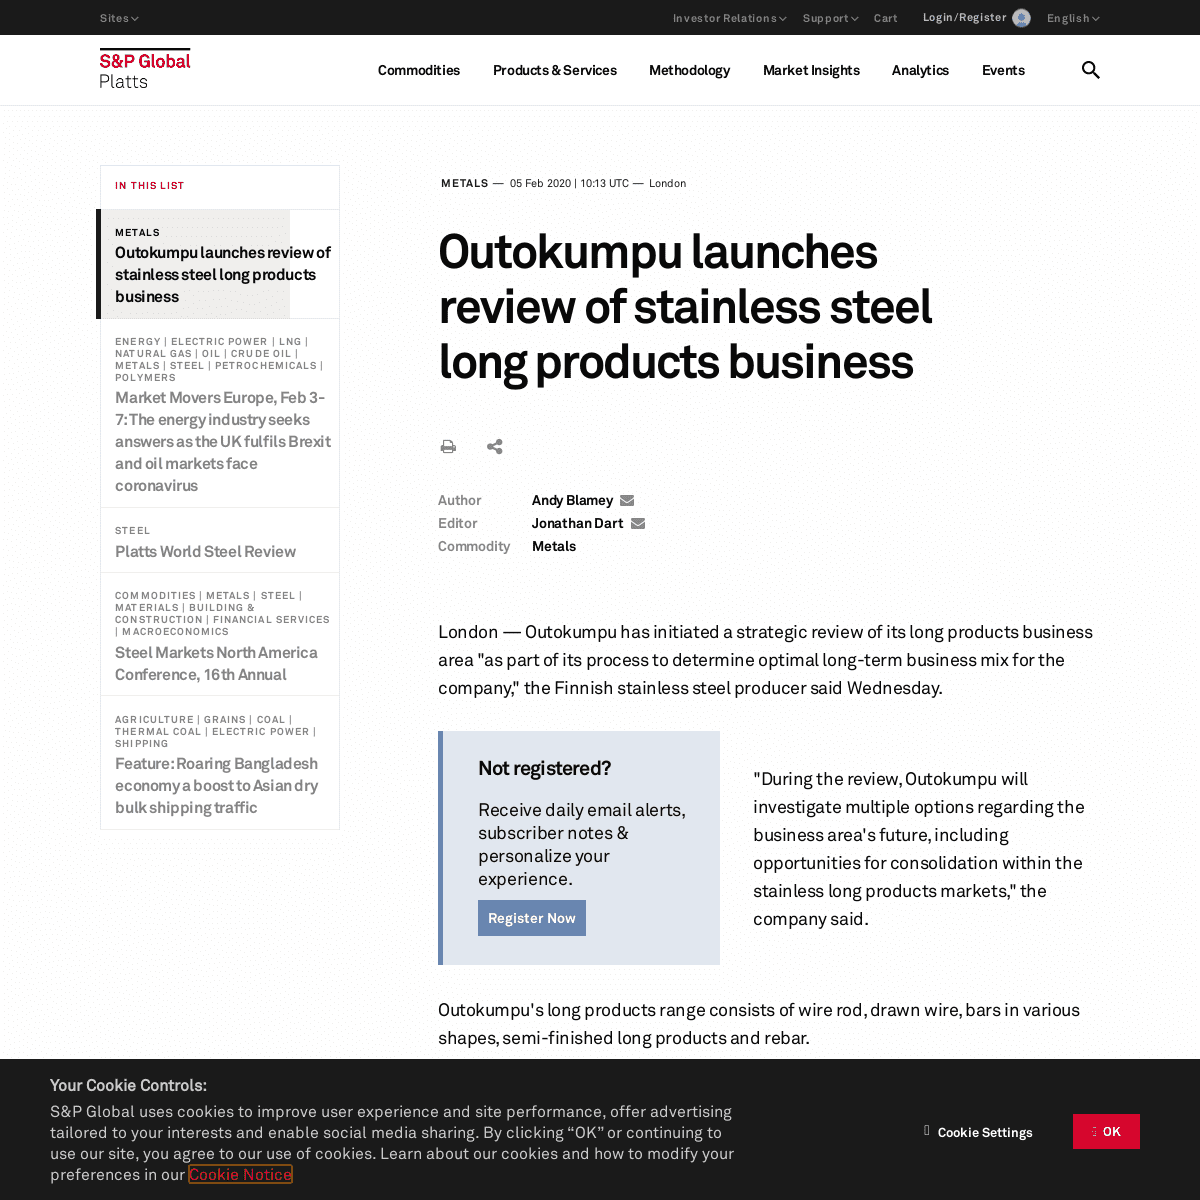 A complete backup of www.spglobal.com/platts/en/market-insights/latest-news/metals/020520-outokumpu-launches-review-of-stainless